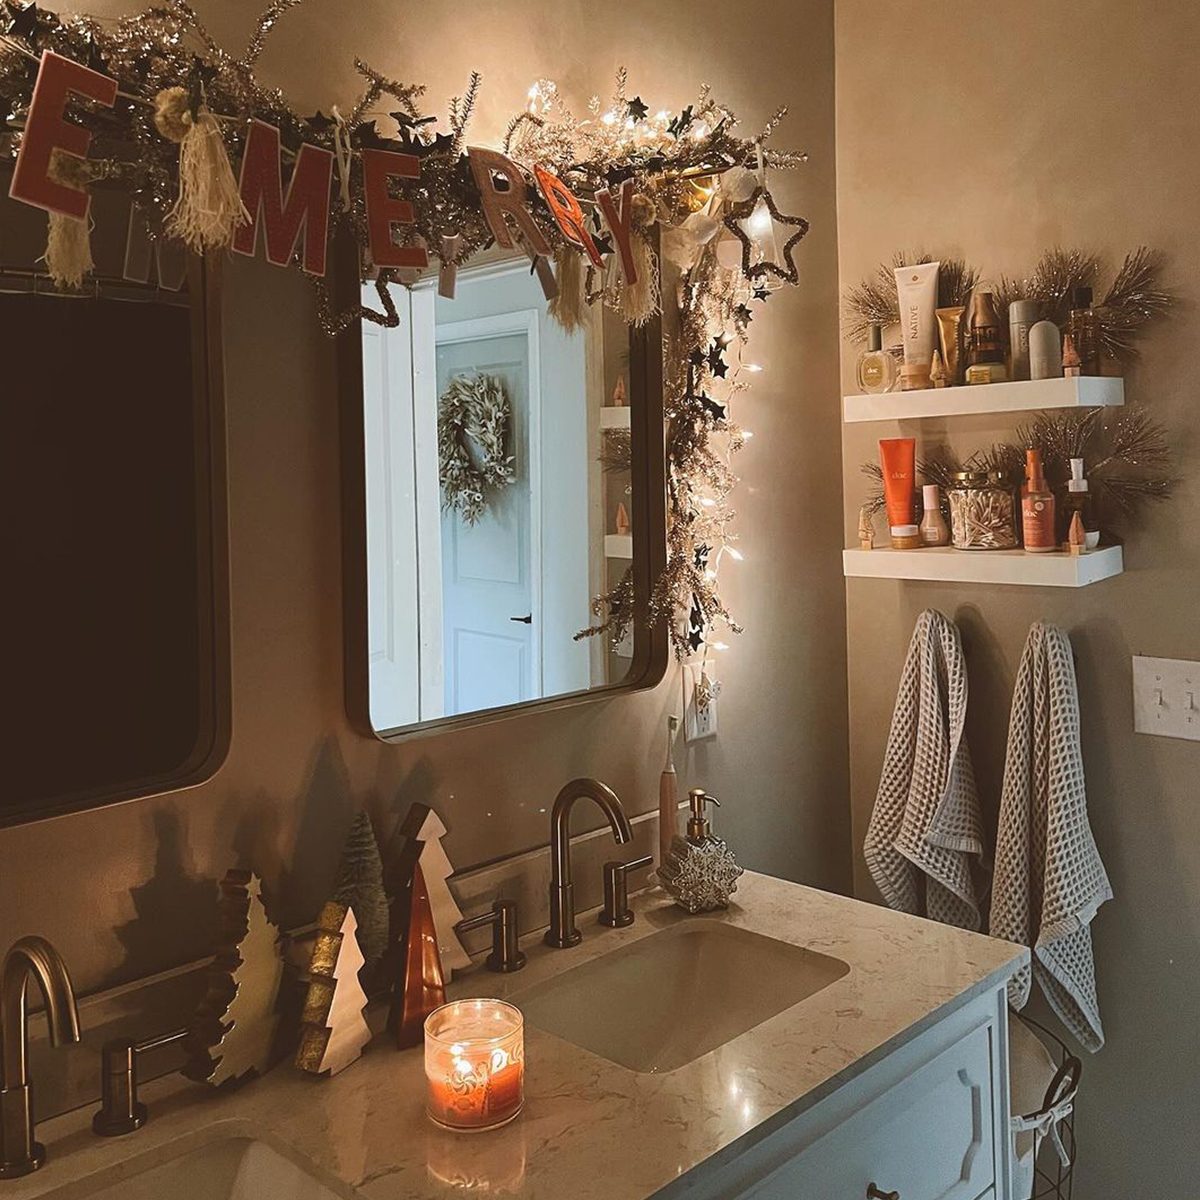 10 Bathrooms Decorated for Christmas To Give You Inspiration